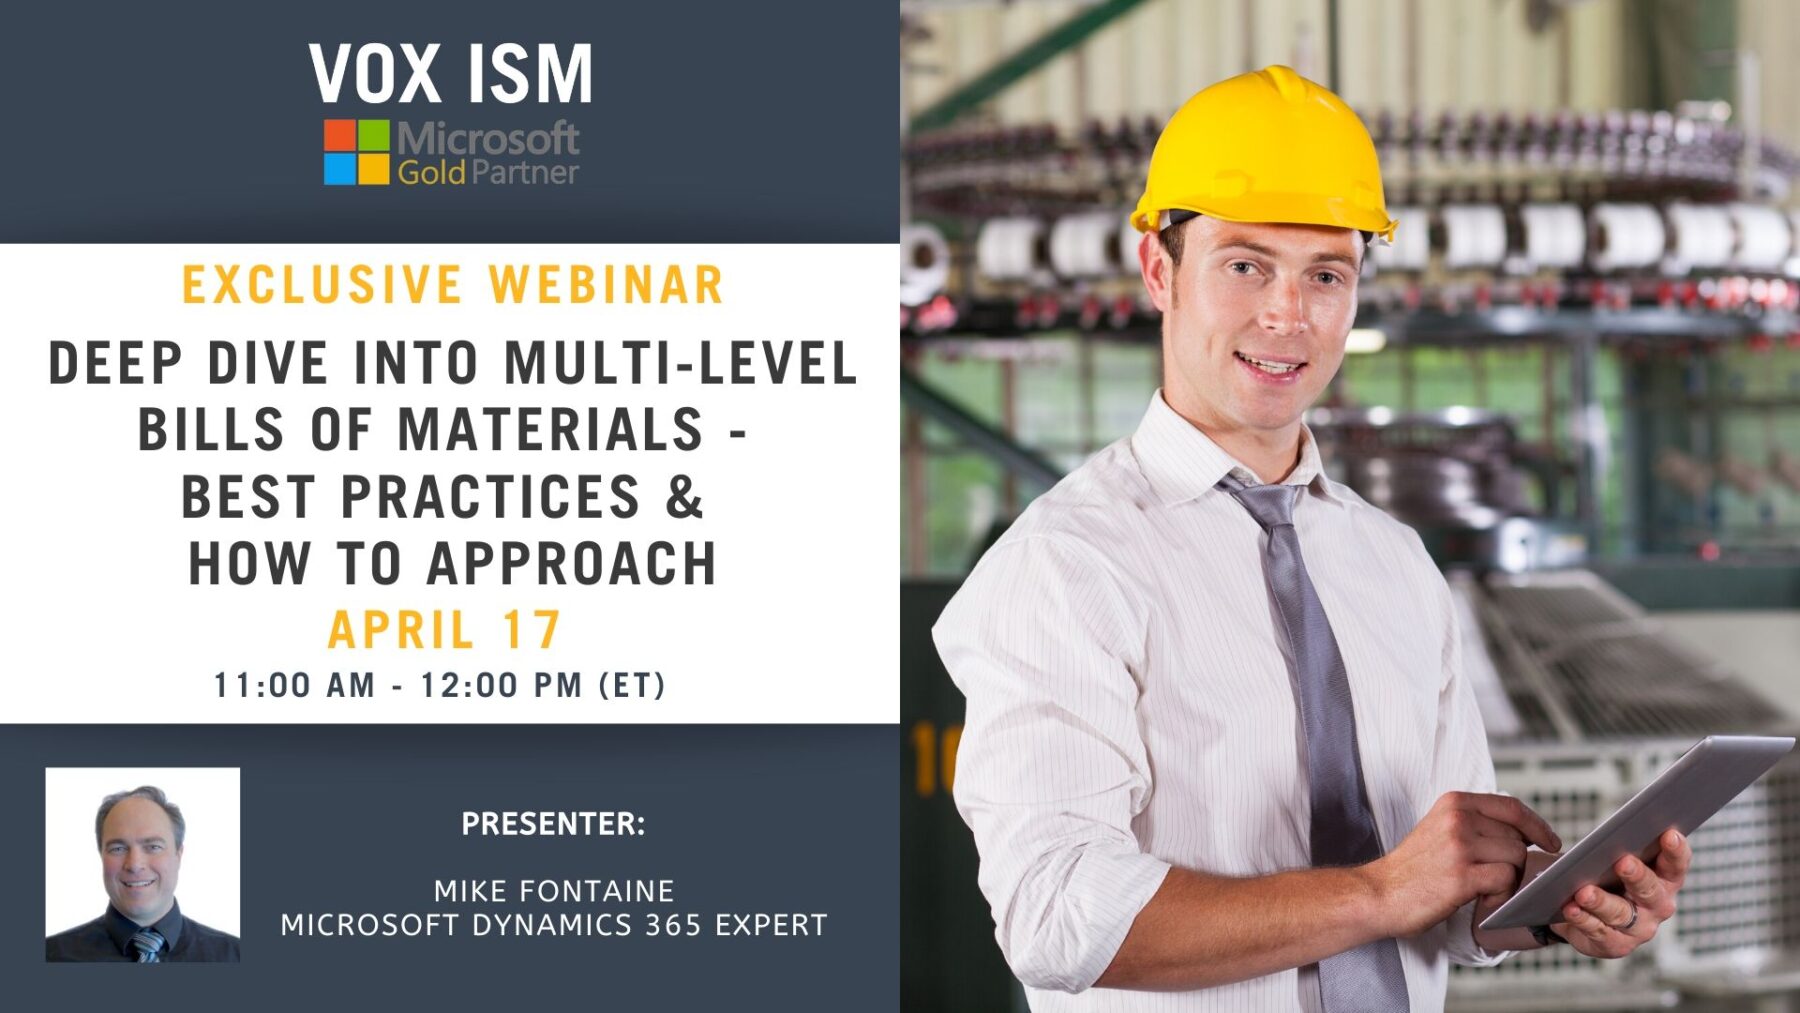 Deep Dive into Multi-level Bills of Materials - Best Practice/How to Approach - April 17 - Webinar_VOX ISM